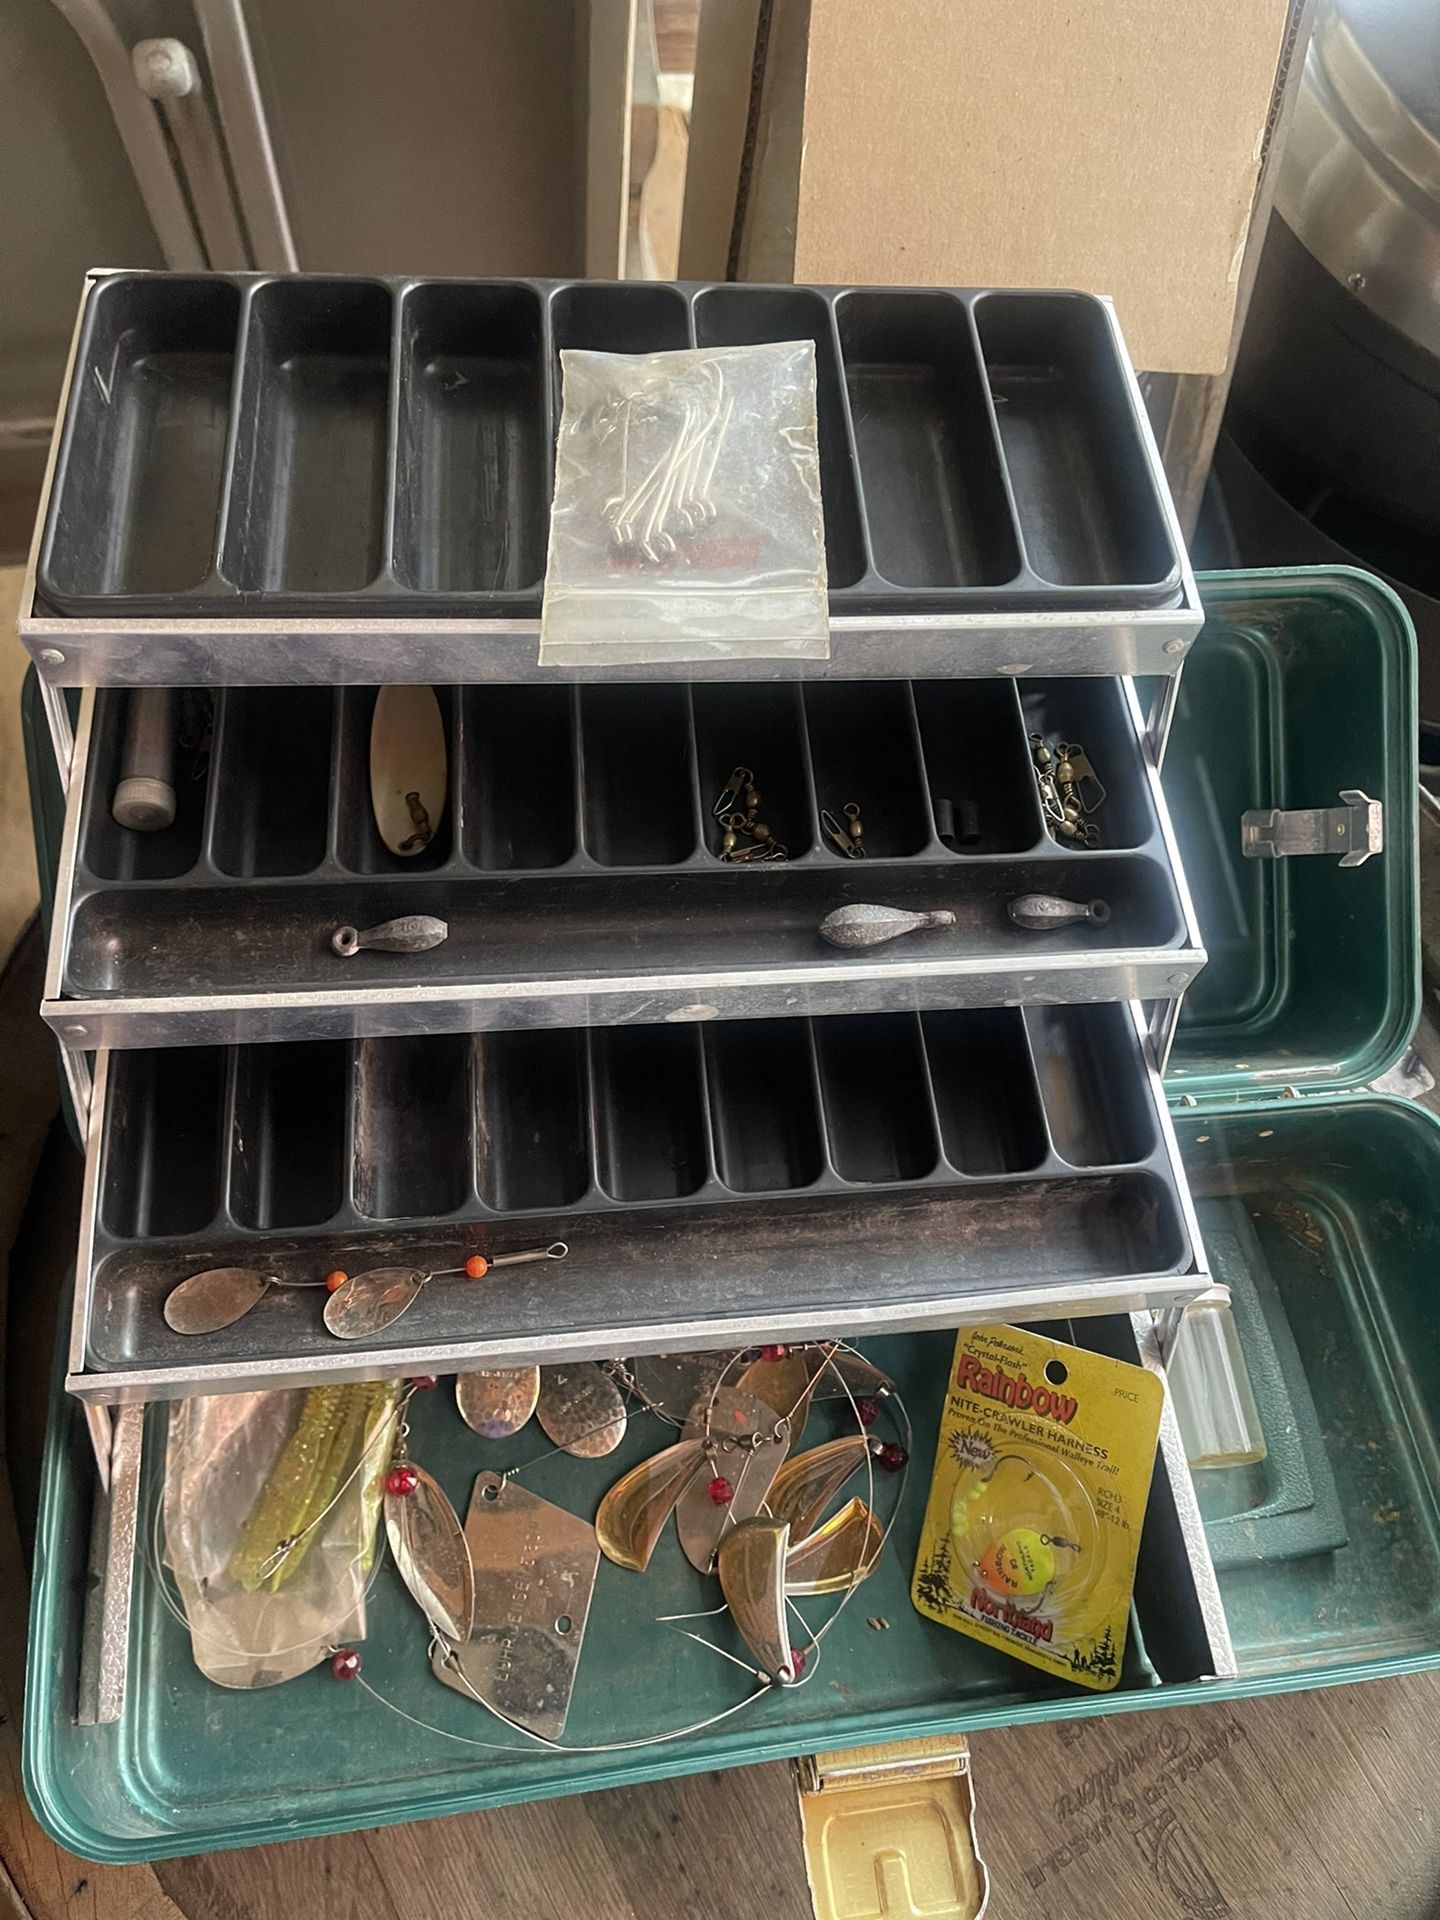 Fishing Gear for Sale in Springfield, OR - OfferUp